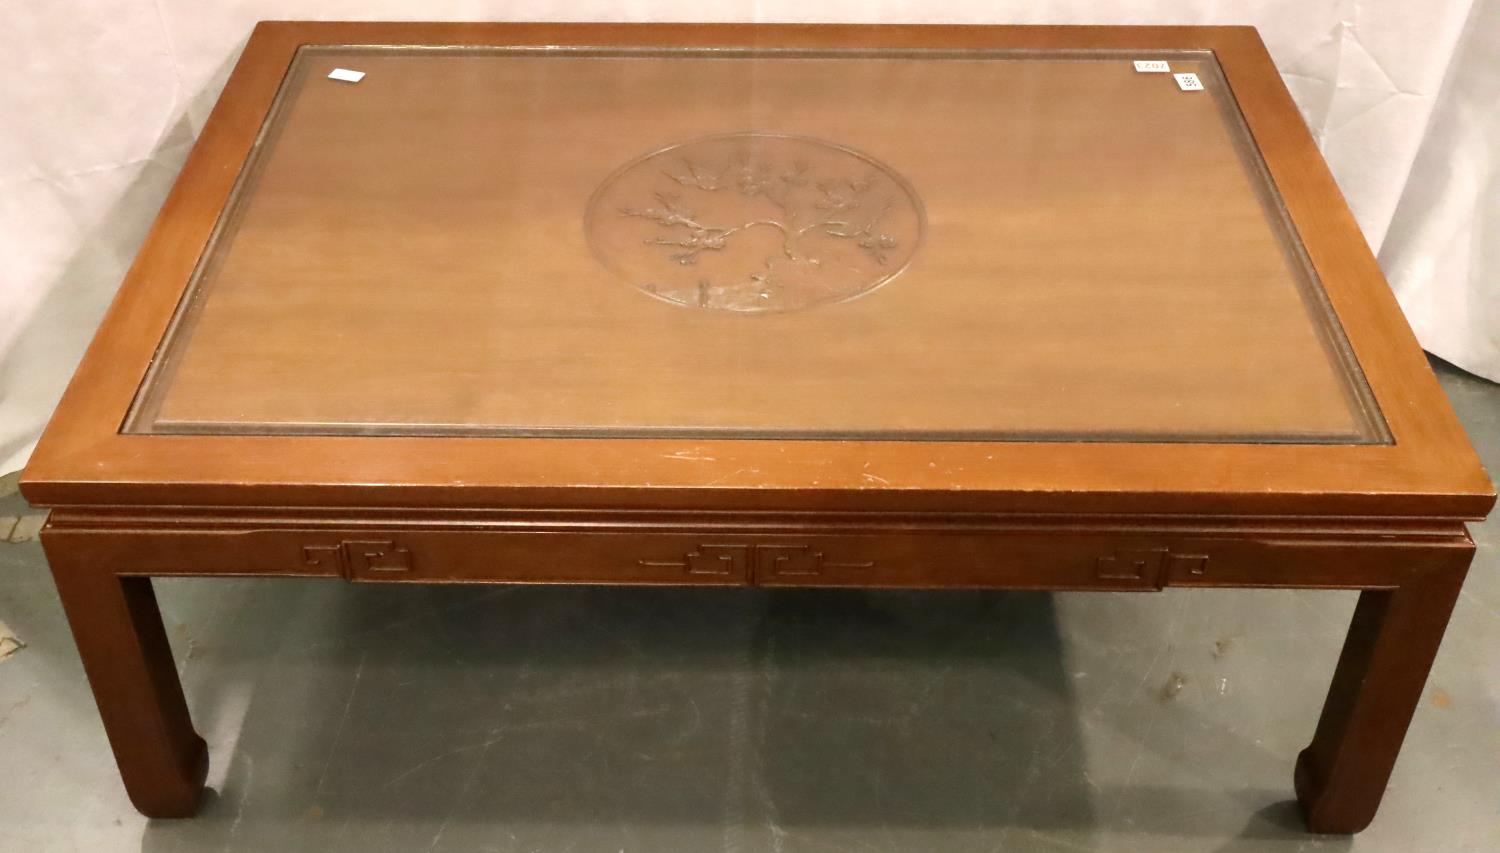 A large Oriental hardwood coffee table carved with inset glass top, 122 x 87 x 46 cm H. Not